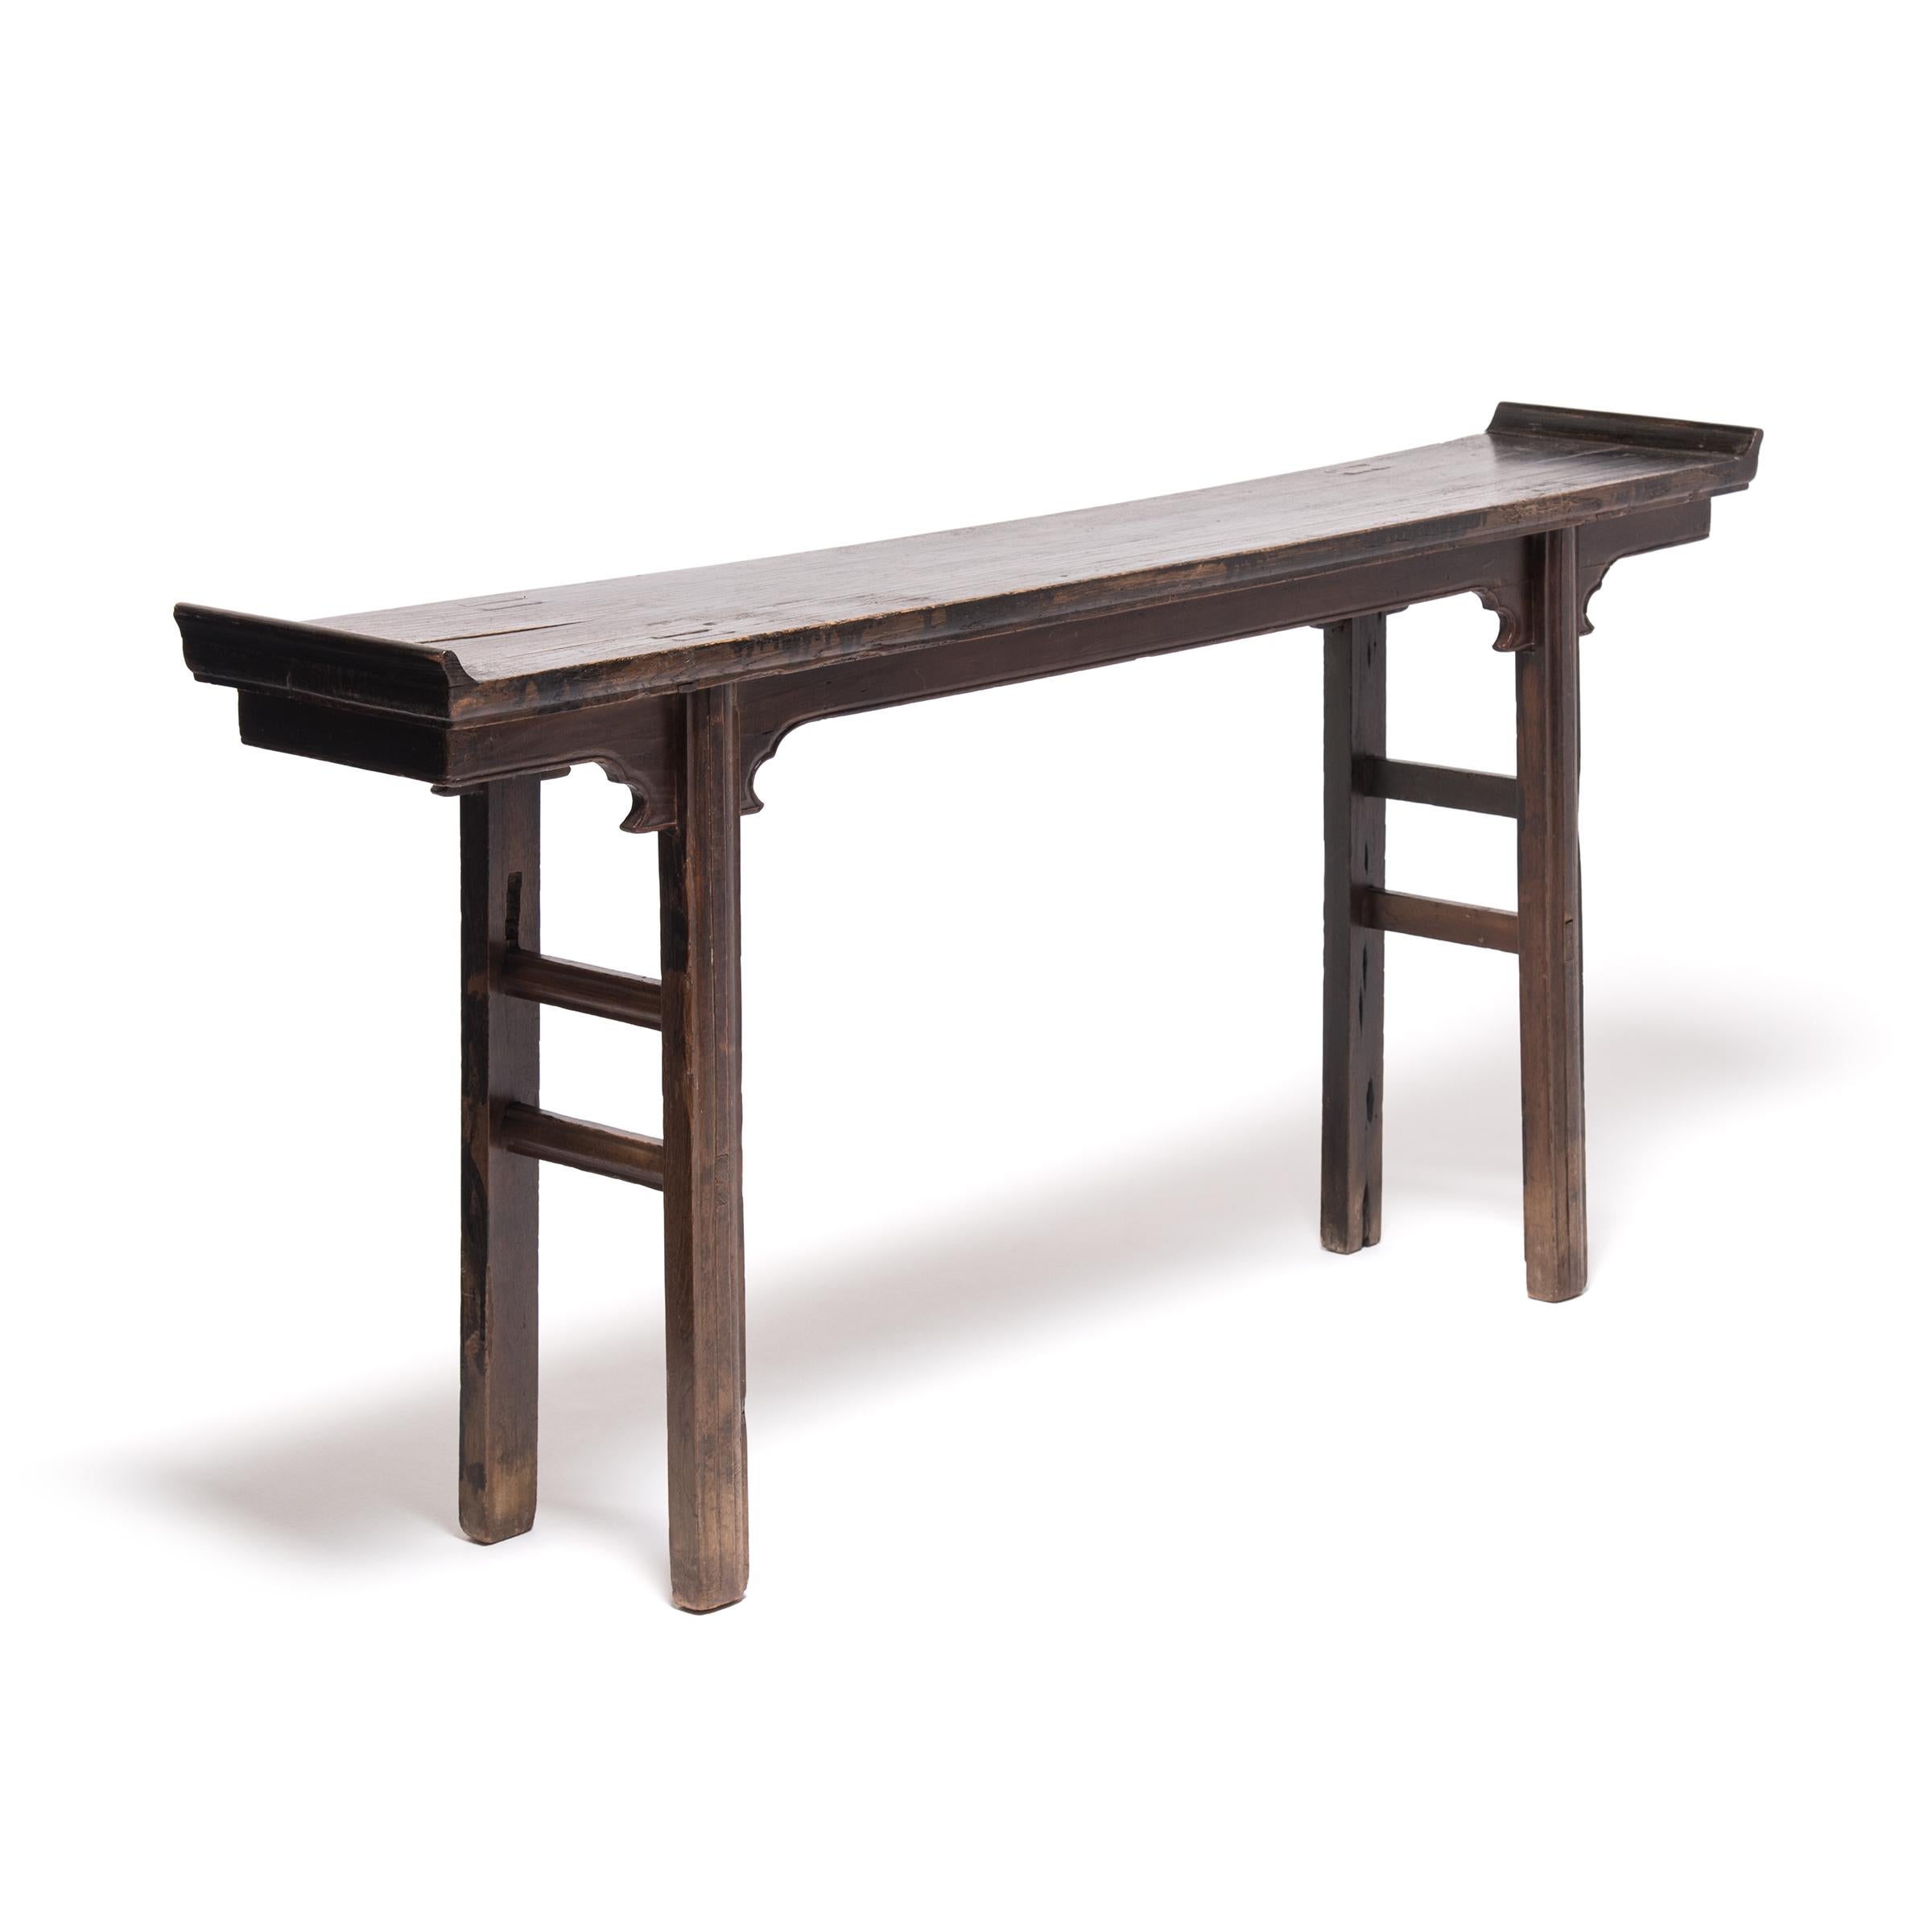 Qing Shallow Chinese Altar Table with Everted Ends, C. 1850